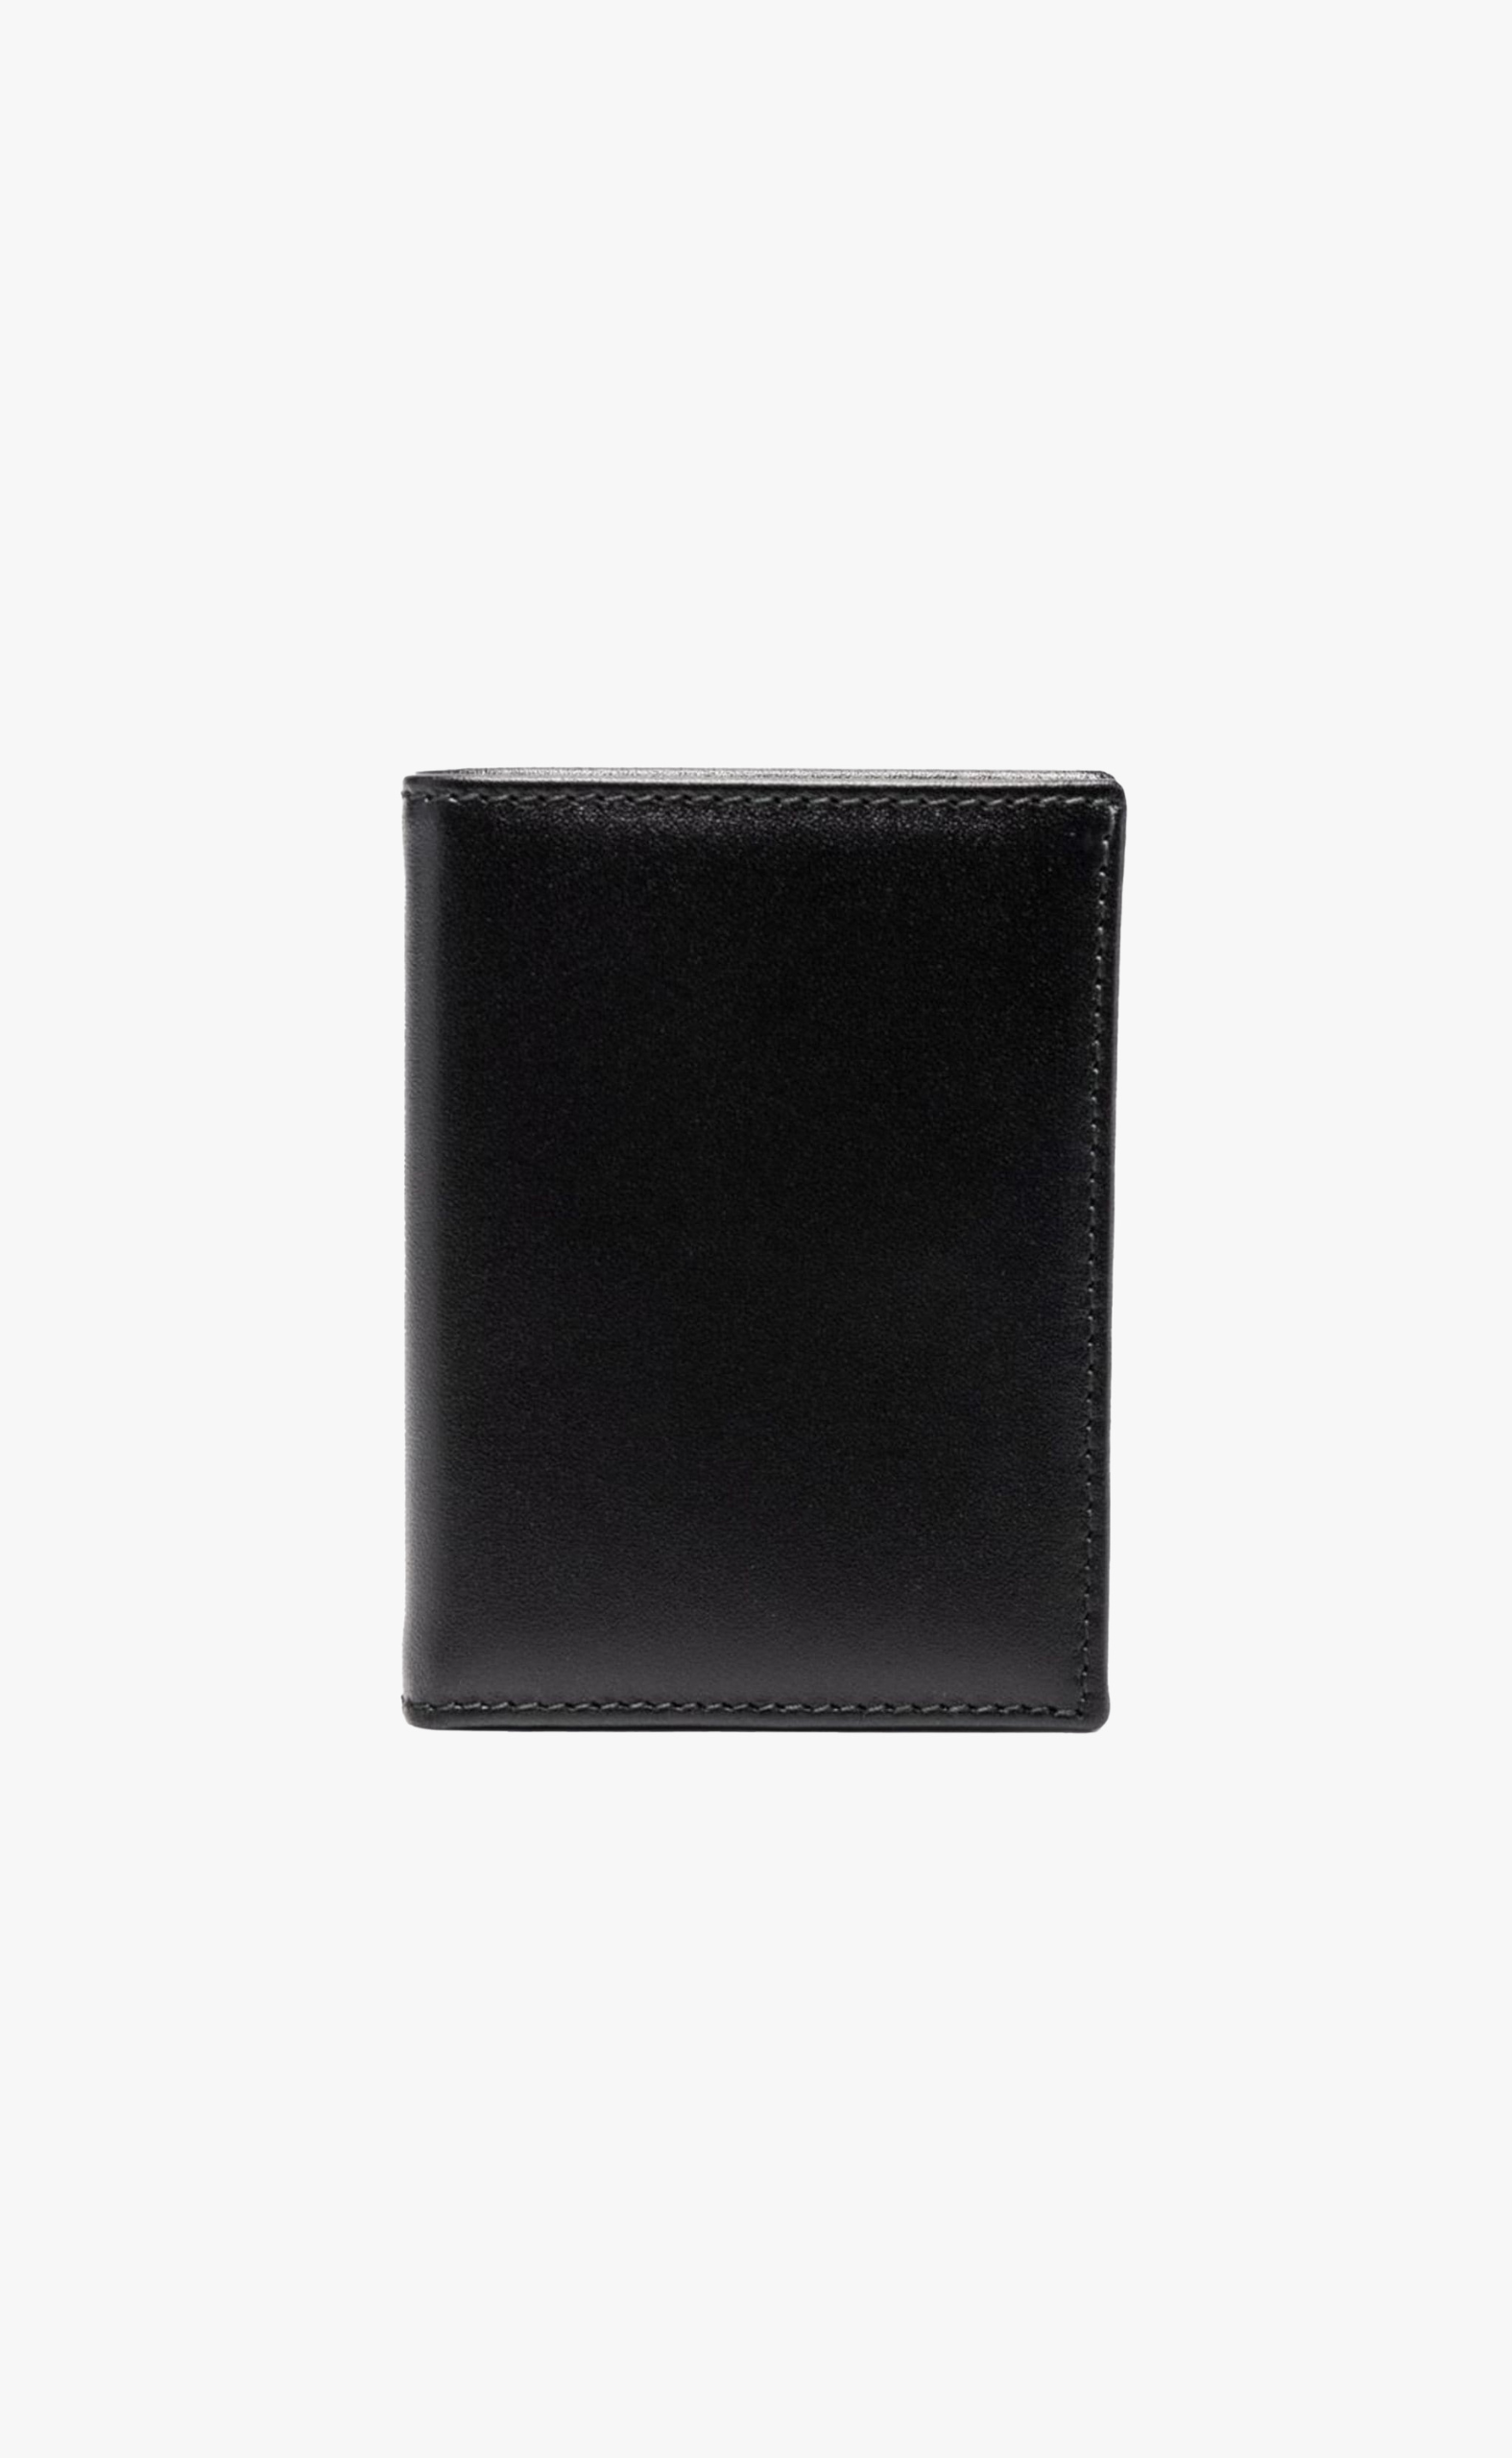 BLACK CLASSIC LEATHER LINE A WALLET